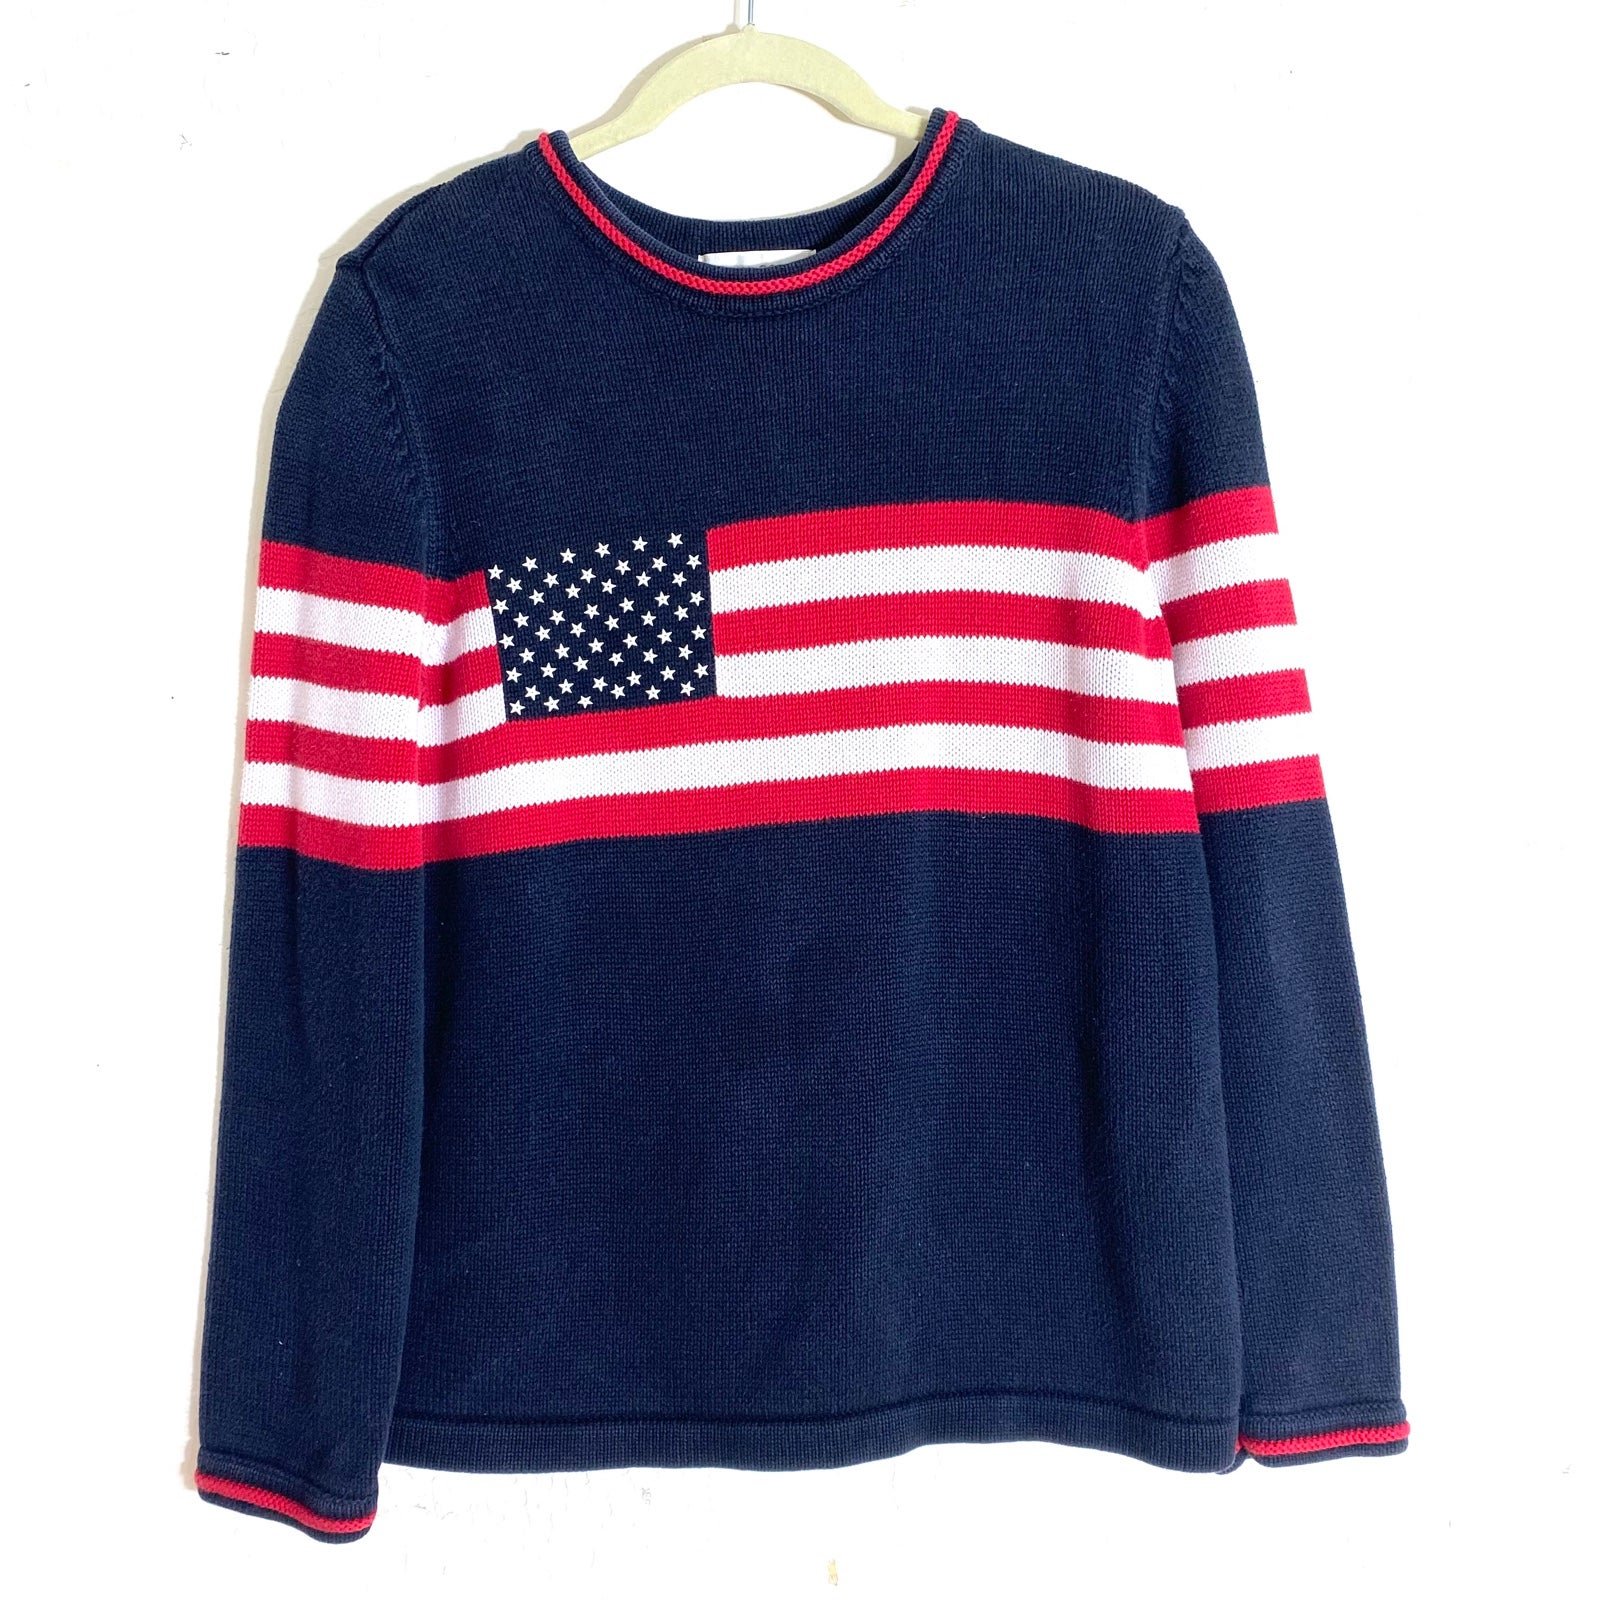 High quality Vintage Casual Corner Flag Sweater Red Whi